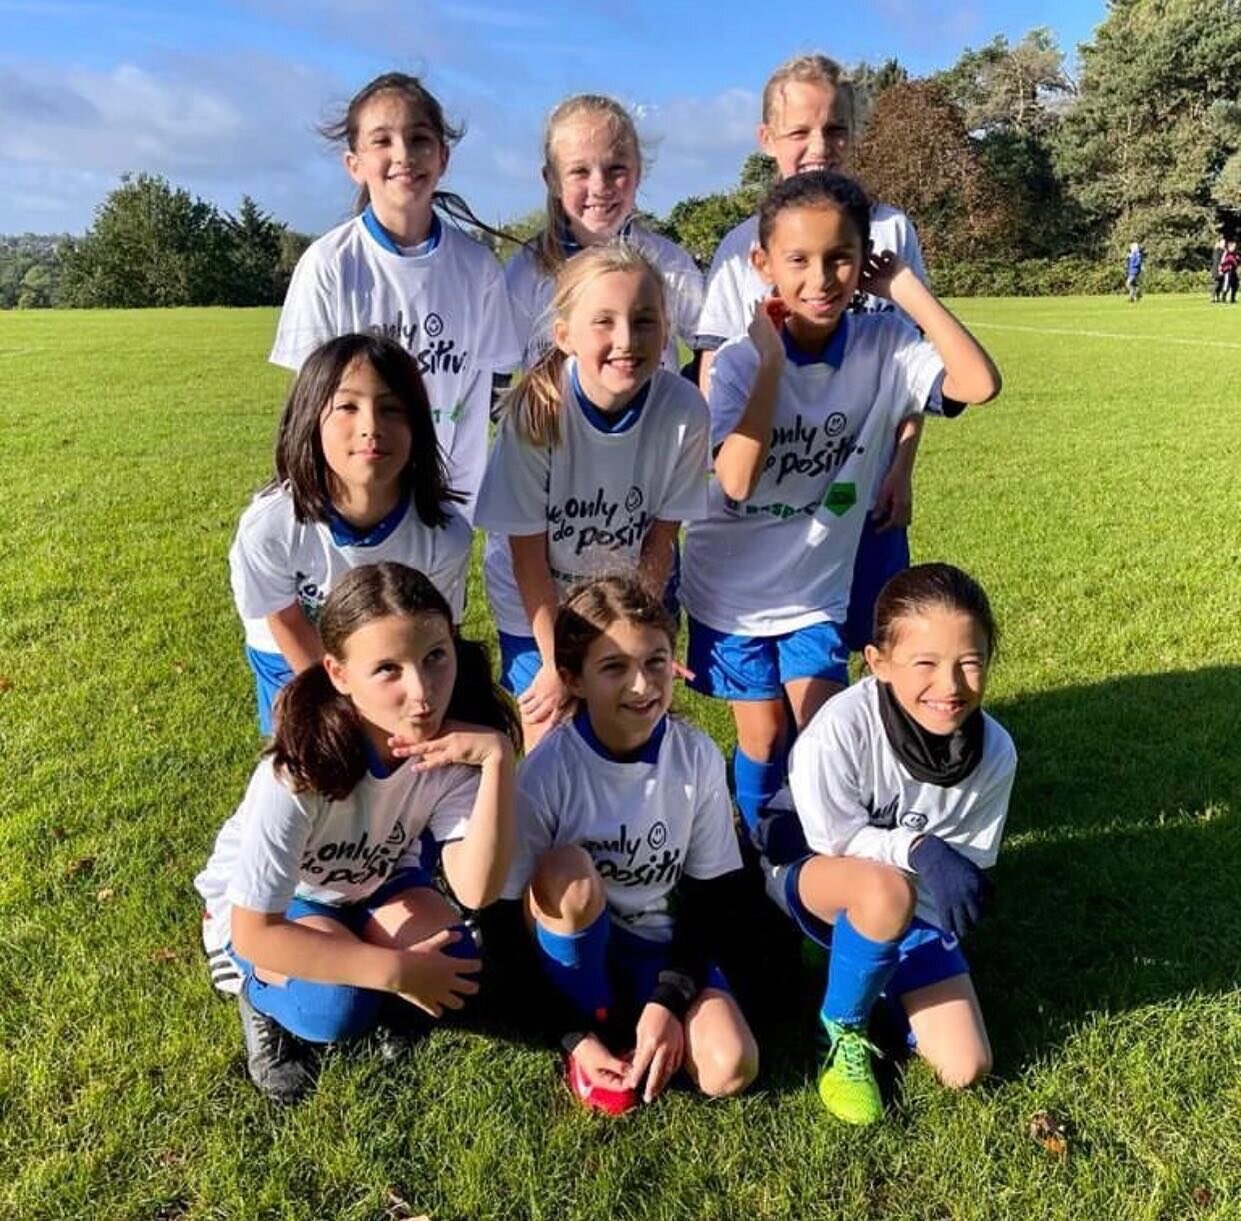 Big shout out to U10s at @acfinchley for their awesome &ldquo;we only do positive vibes&rdquo;! 🙌